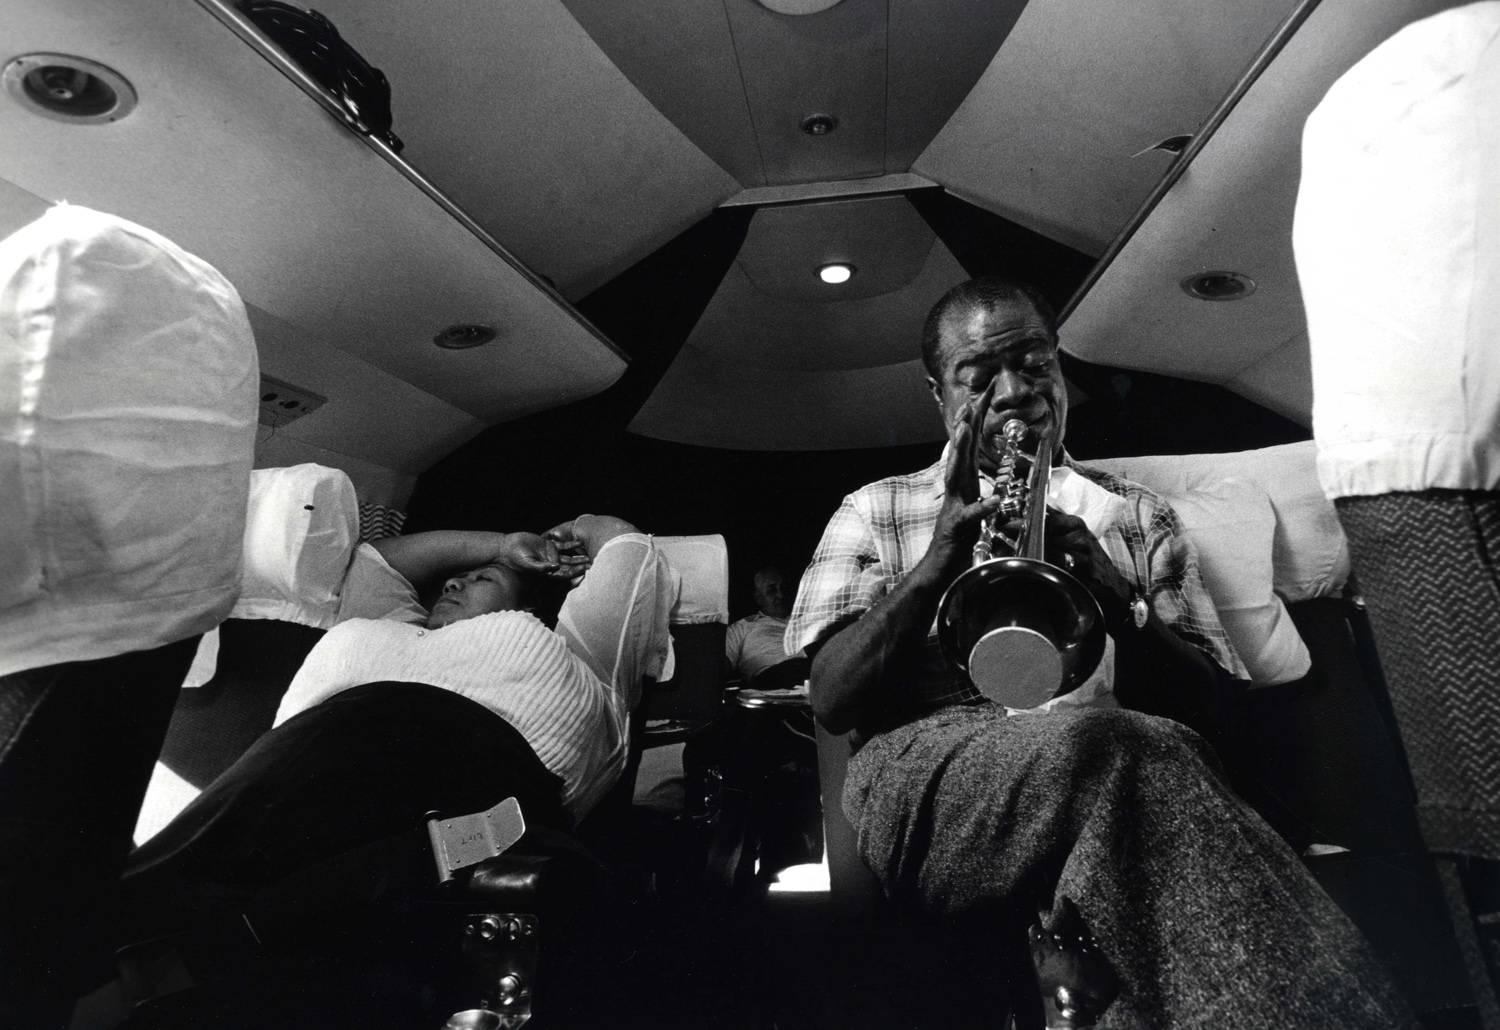 Larry Burrows Black and White Photograph - Why Do I Love You? Louis Armstrong at 14, 000 feet over Africa, May 1956